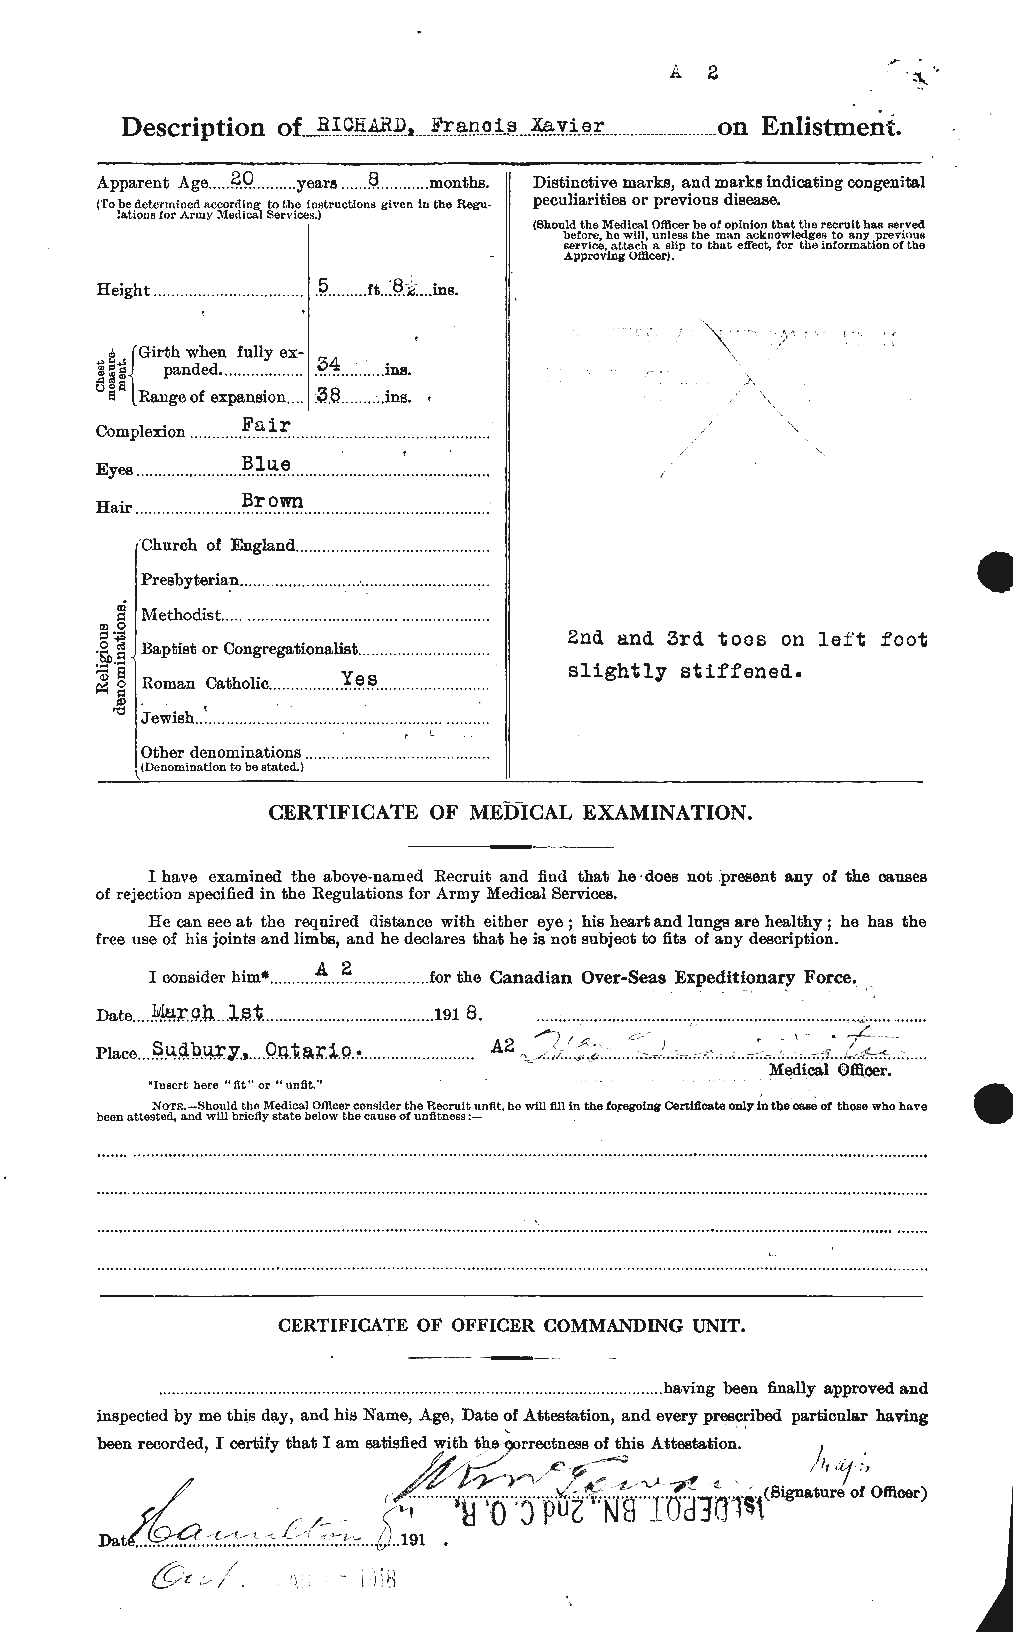 Personnel Records of the First World War - CEF 639044b